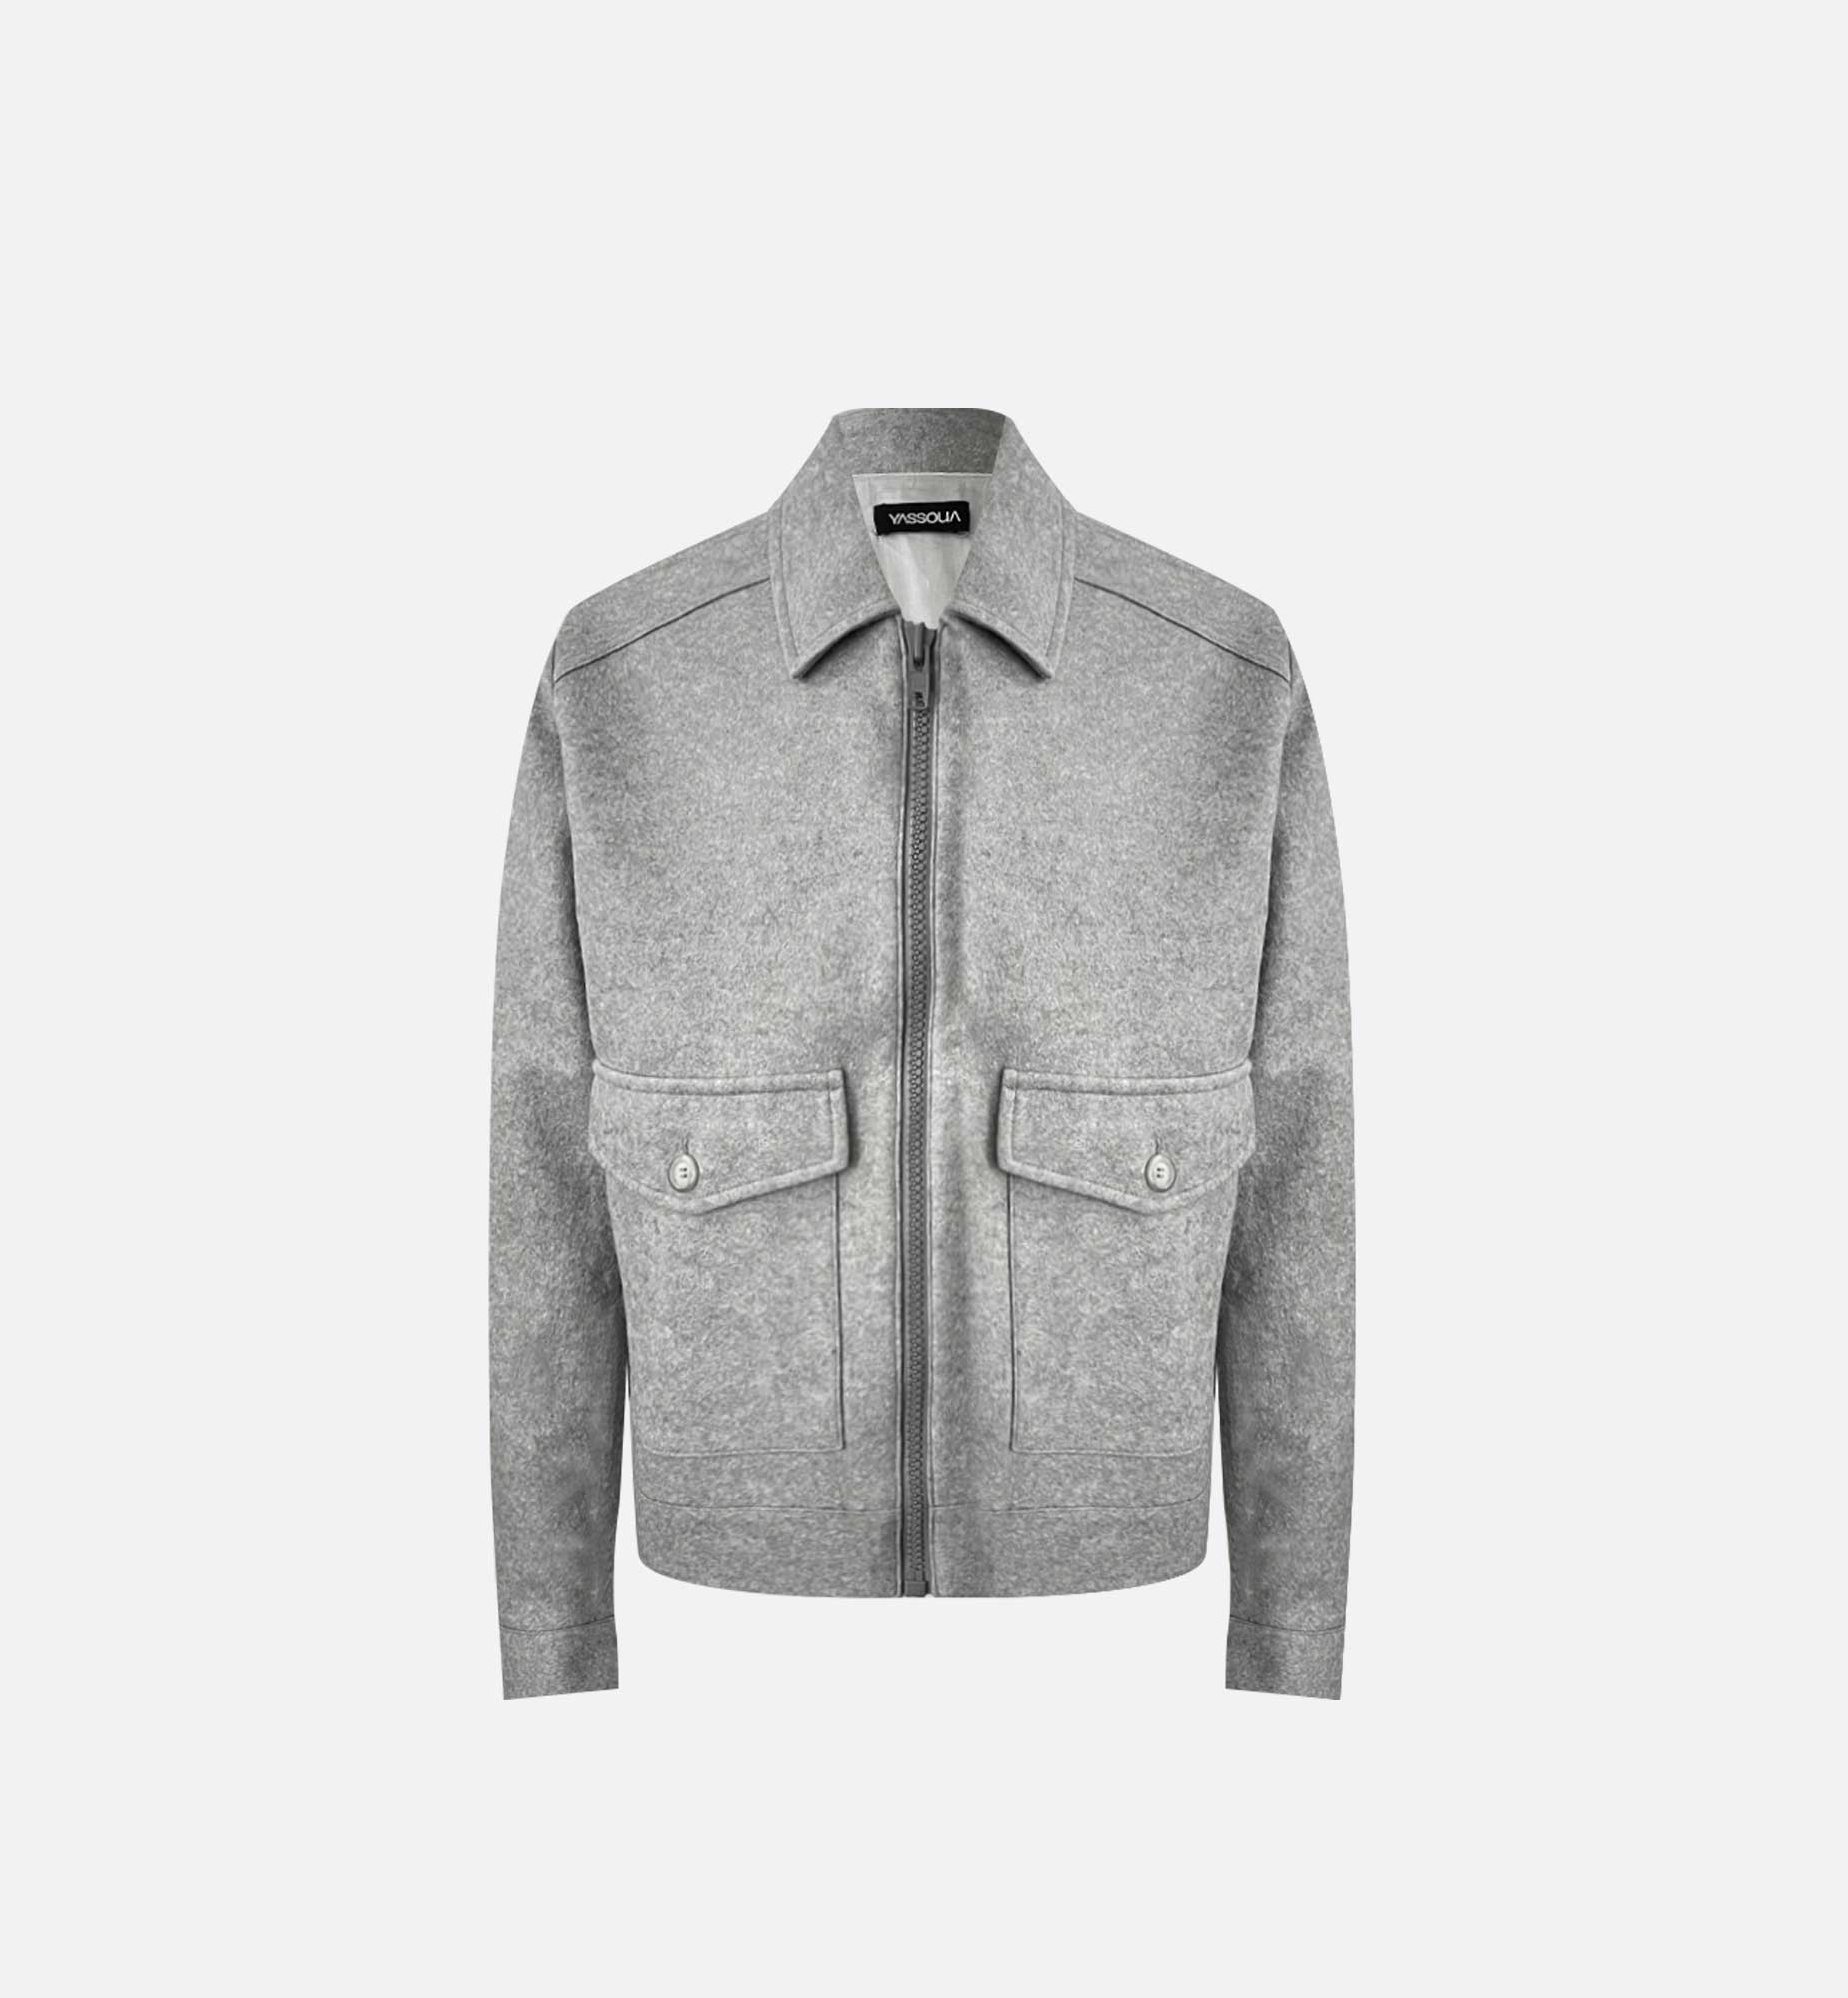 ICONIC SQUARE POCKET GRAY FLANNEL JACKET